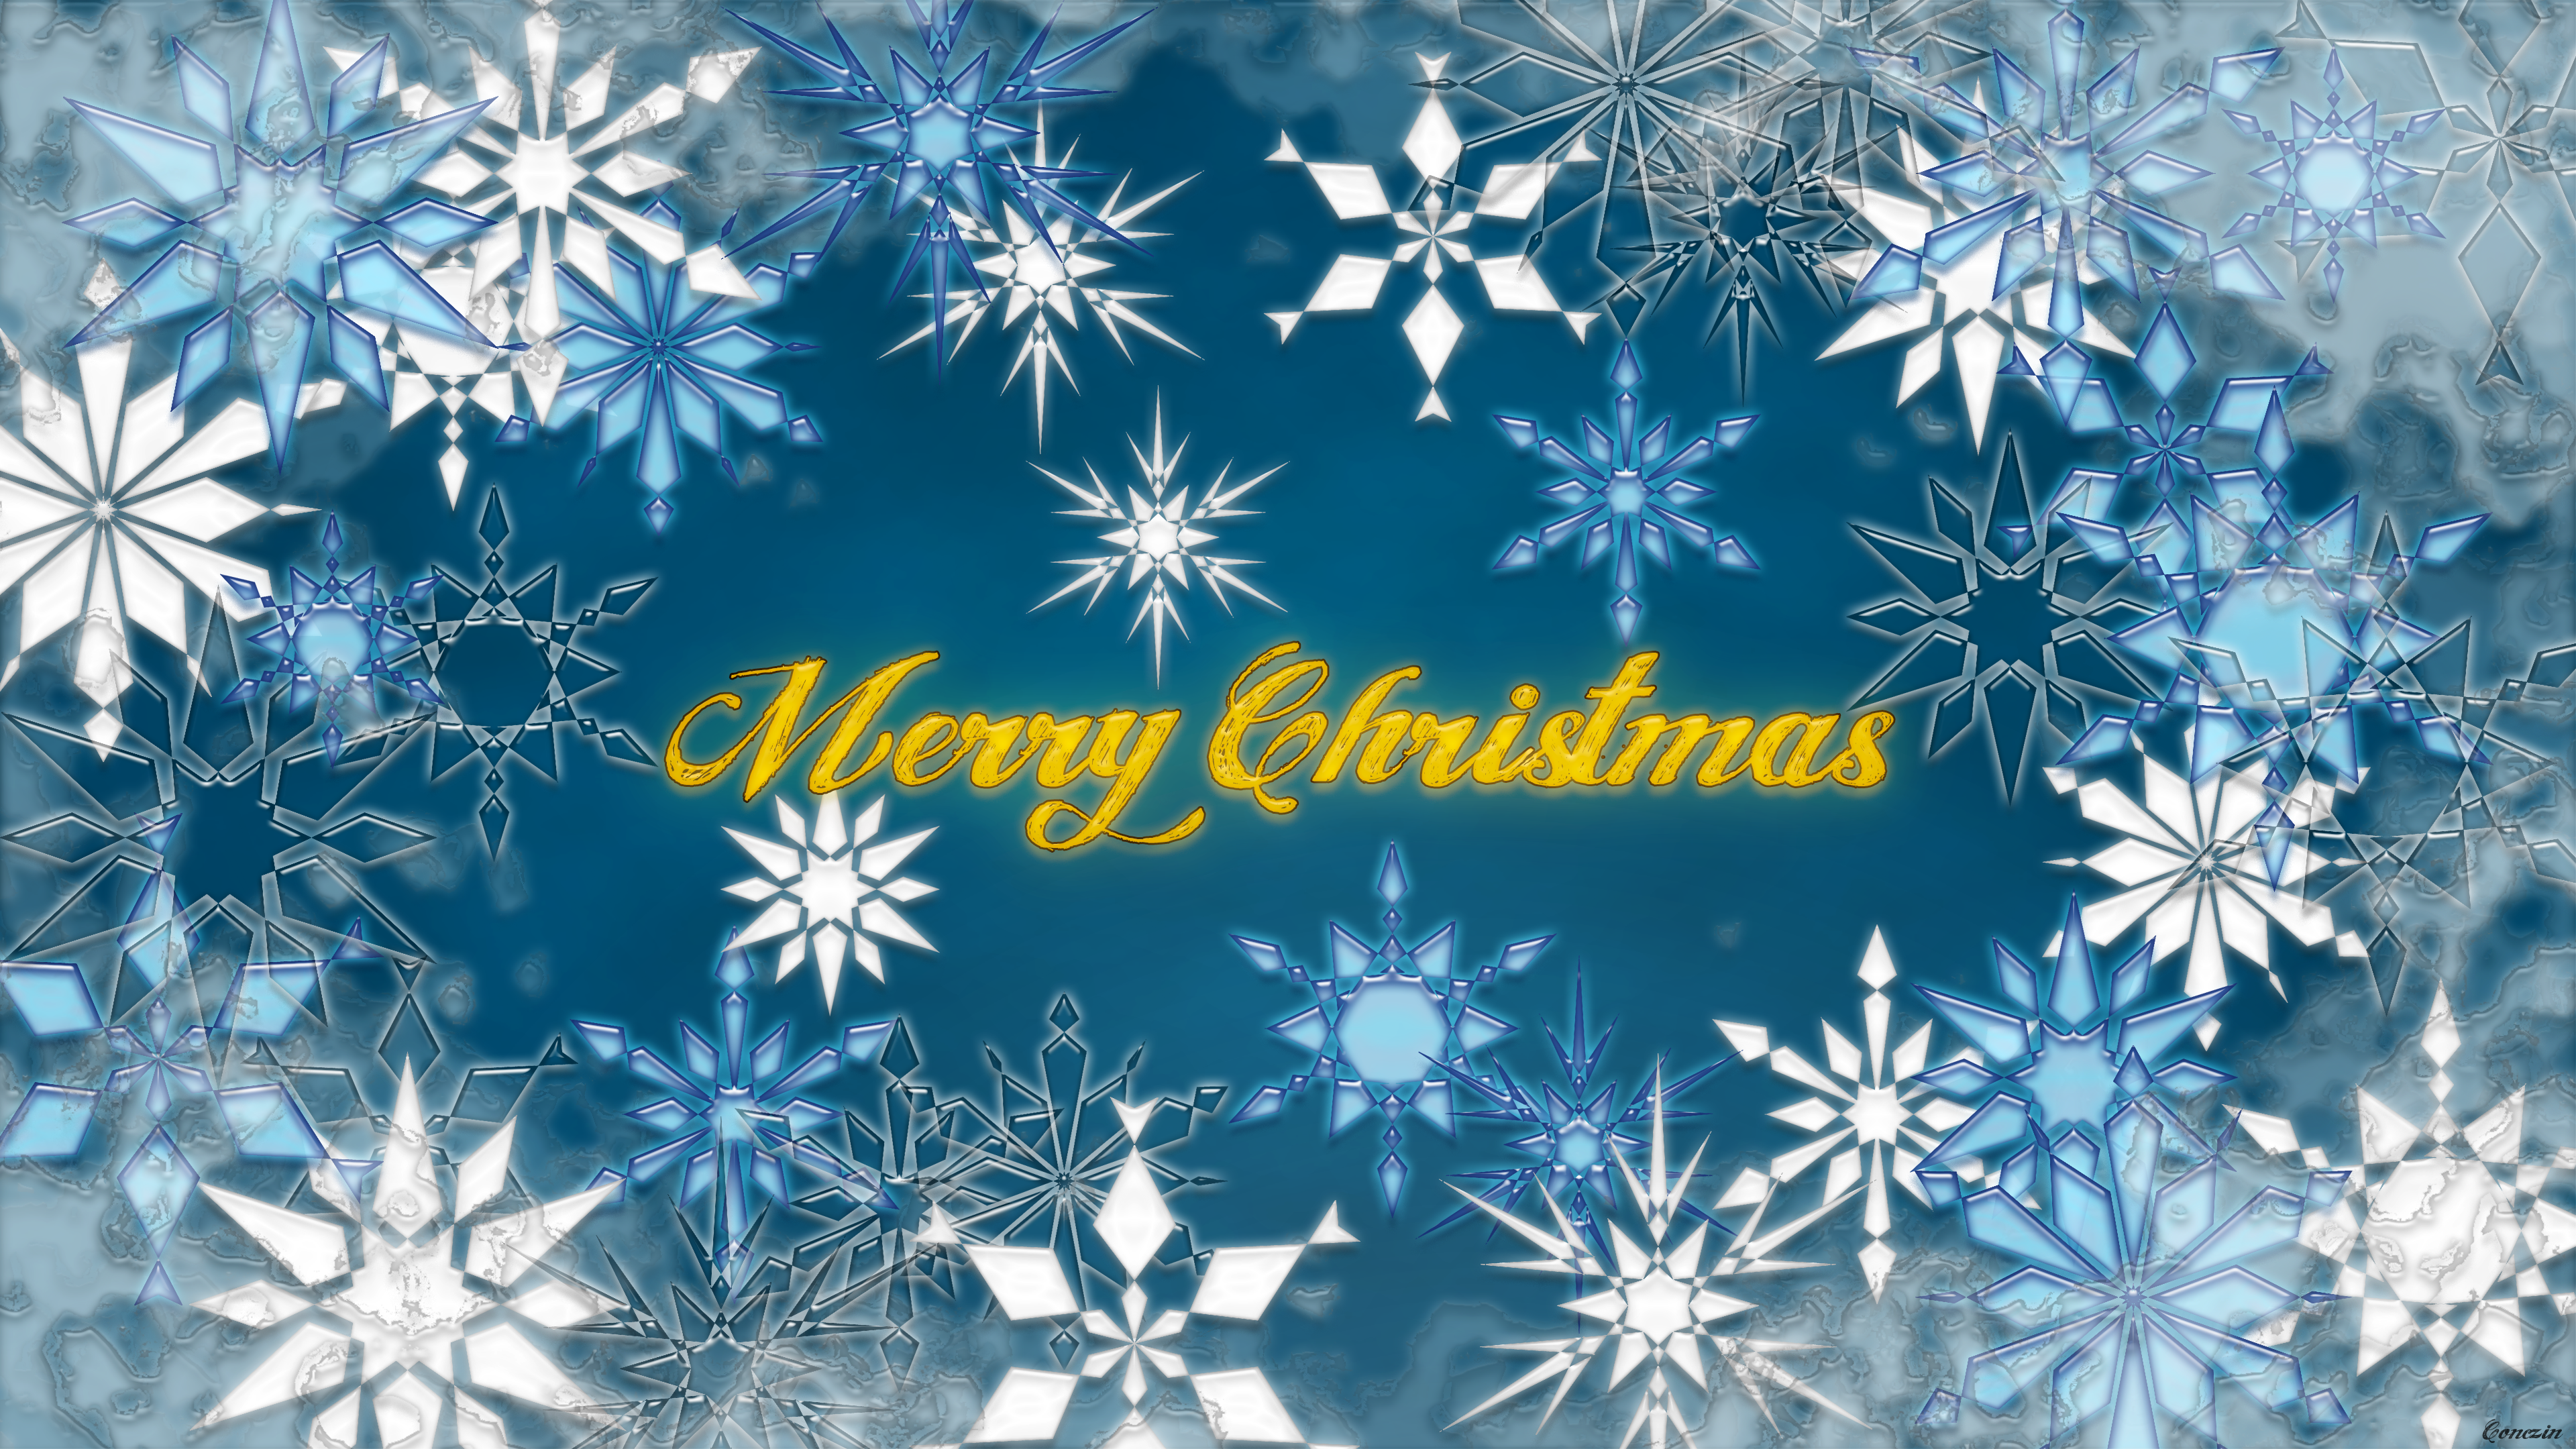 Merry Christmas Photo Album Background, Merry Christmas, Snowflake,  Christmas Background Image And Wallpaper for Free Download